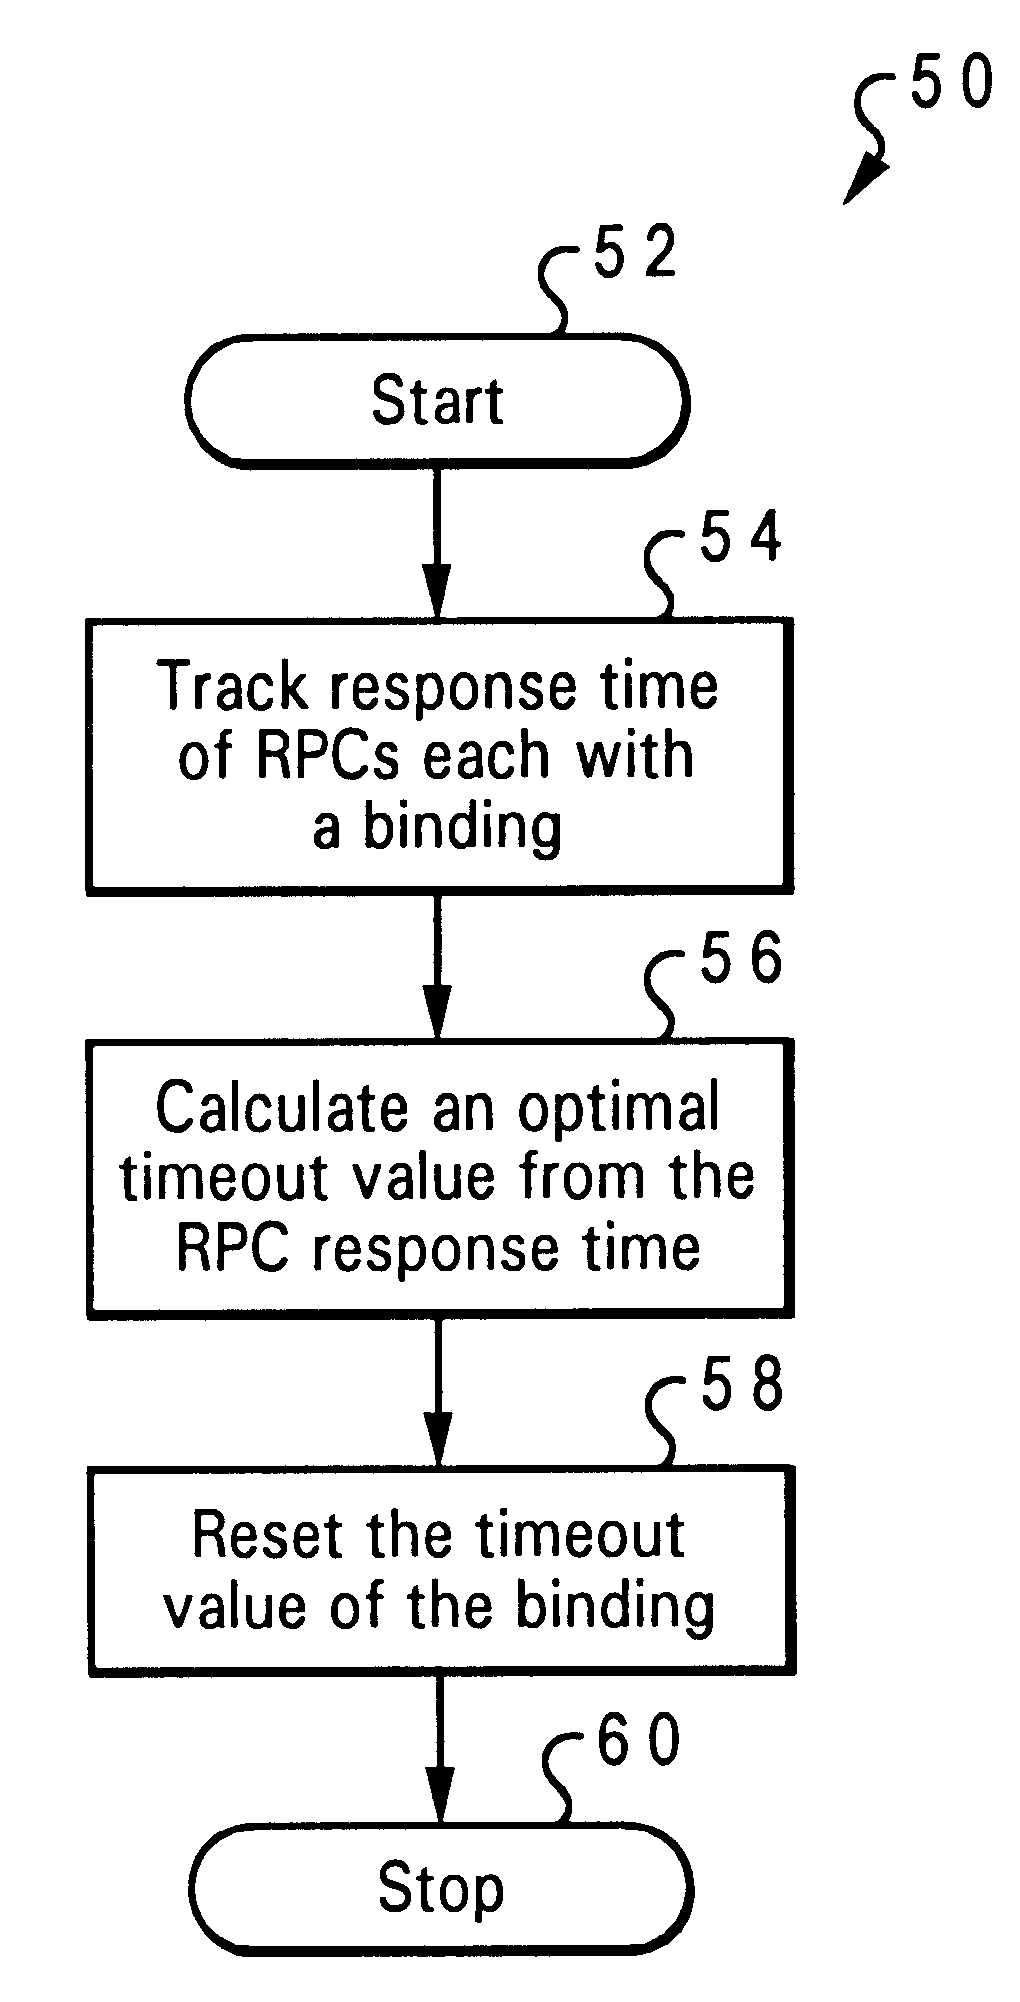 Adaptive timeout value setting for distributed computing environment (DCE) applications